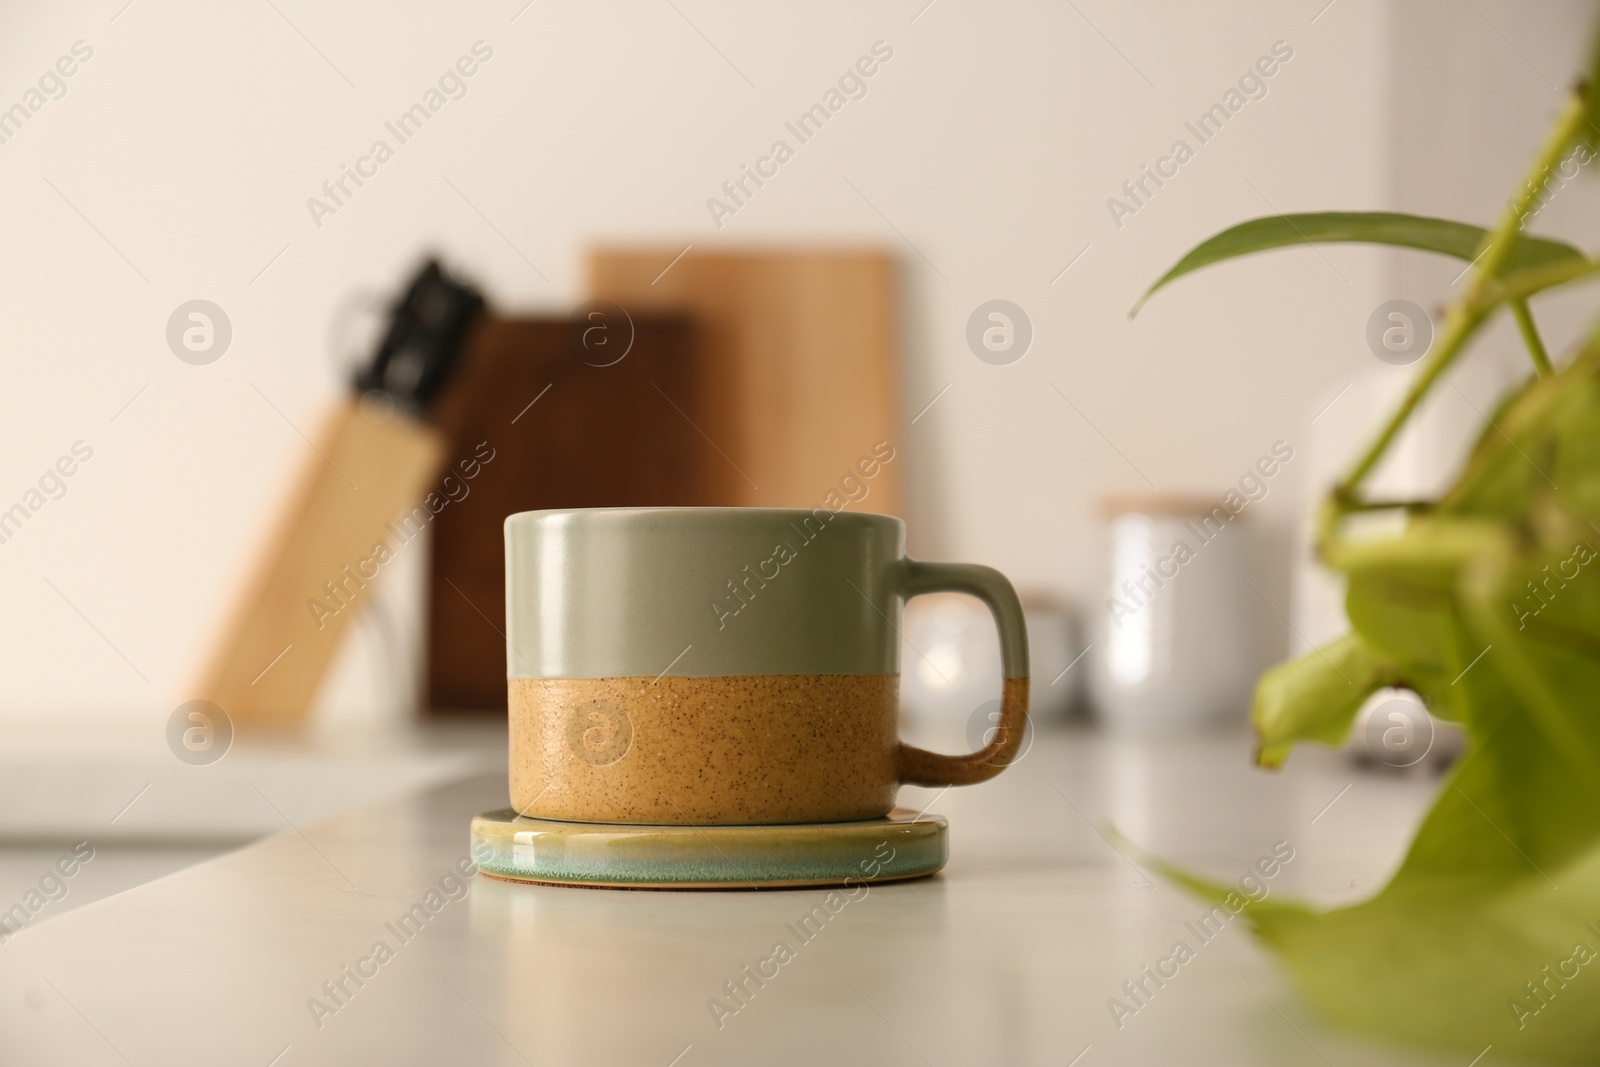 Photo of One ceramic mug with coaster on light countertop in kitchen